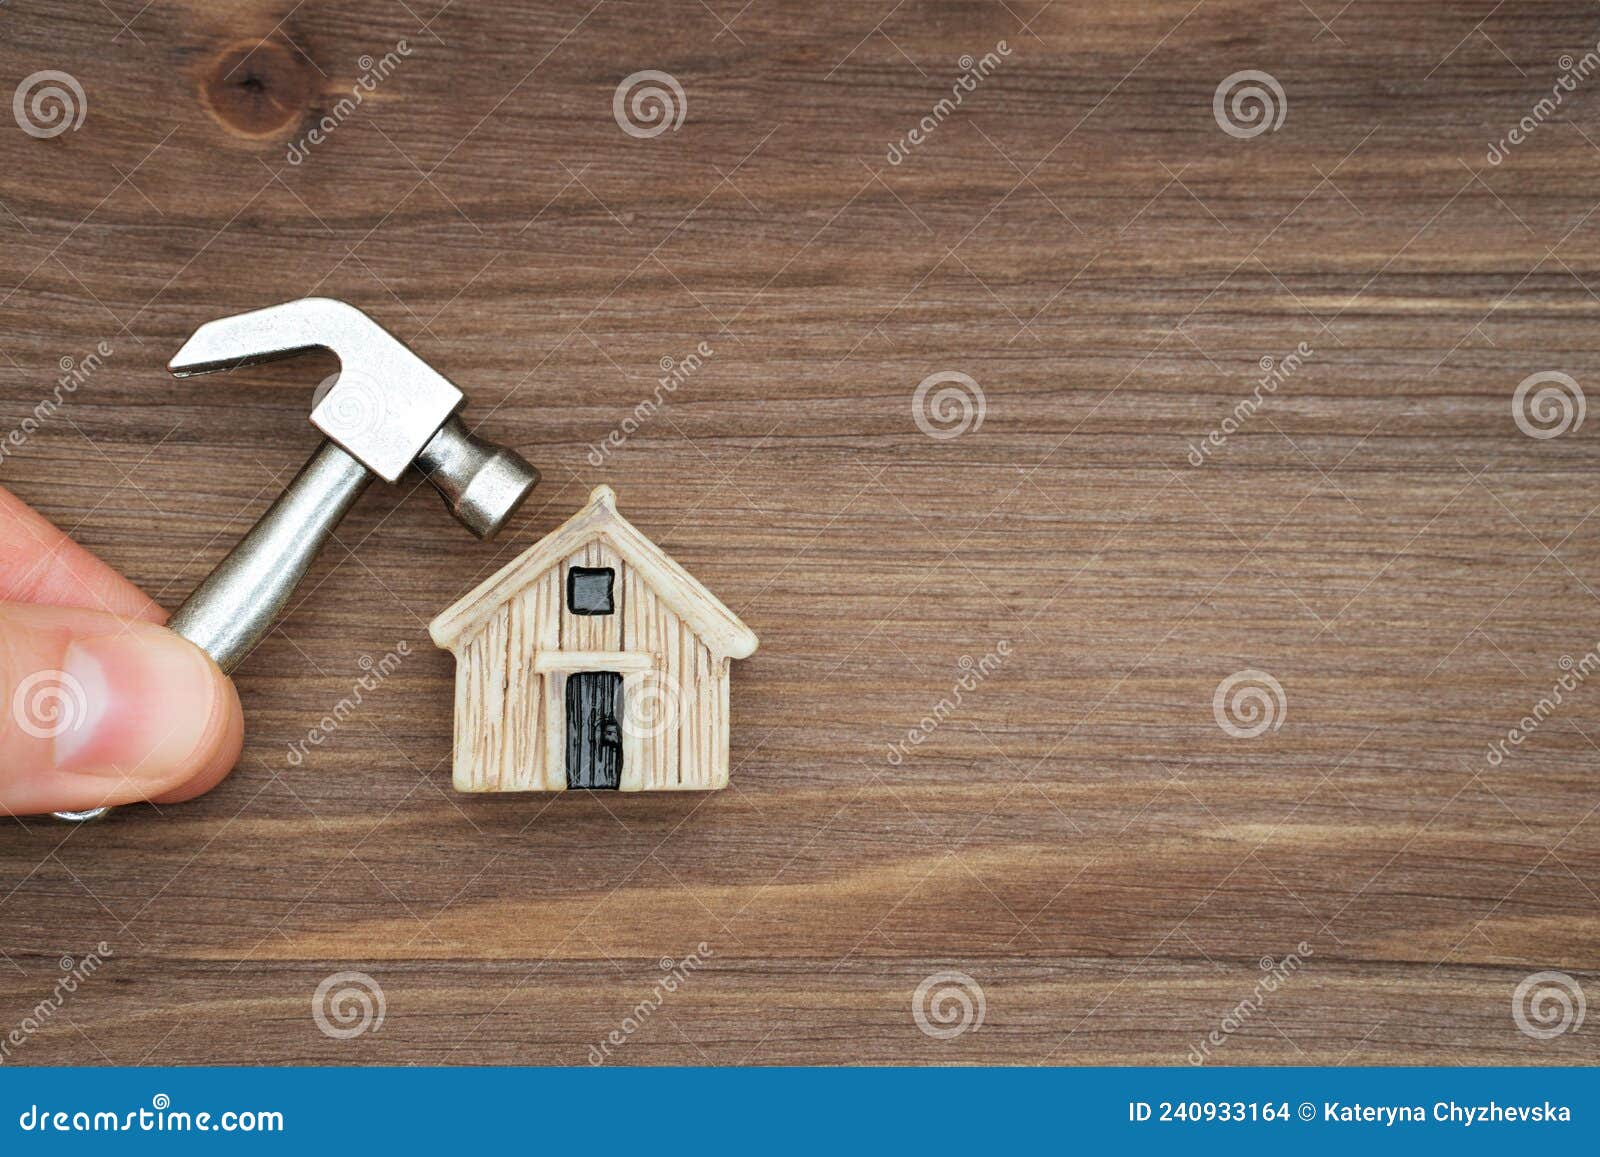 Holding a Miniature Hammer Close To a Tiny House Stock Photo